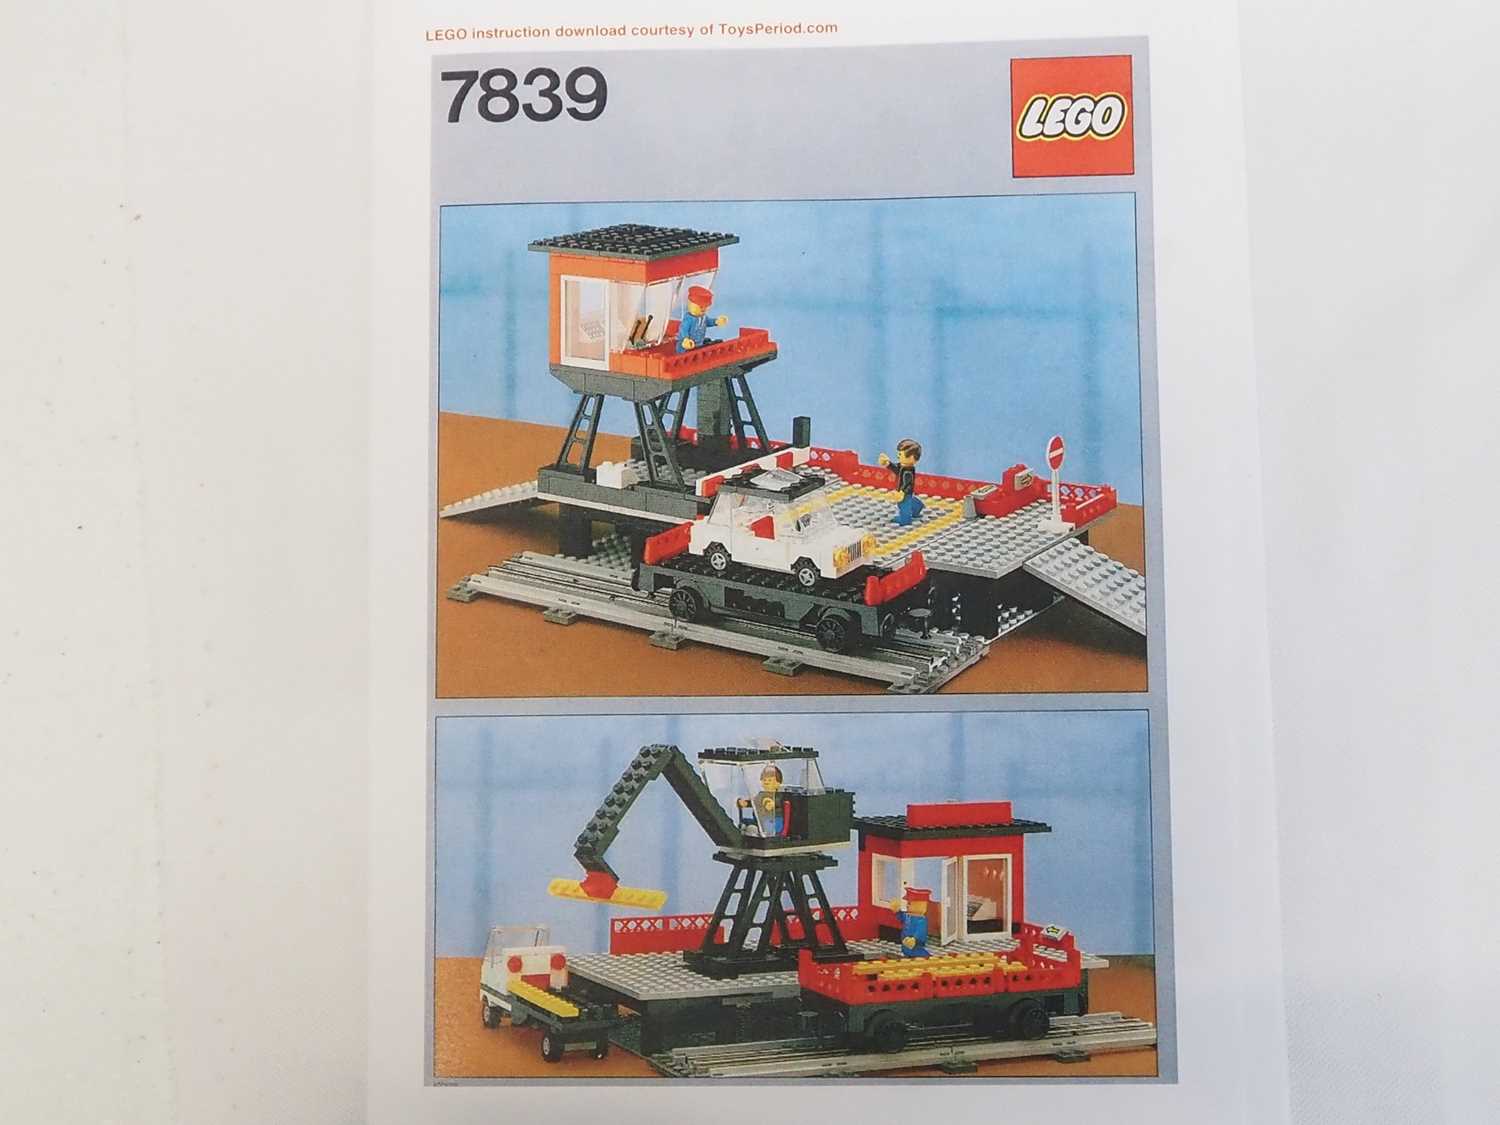 LEGO - TRAIN #7839 - 12v Car Transport Depot - Some parts with internal box, printed instructions no - Image 2 of 3